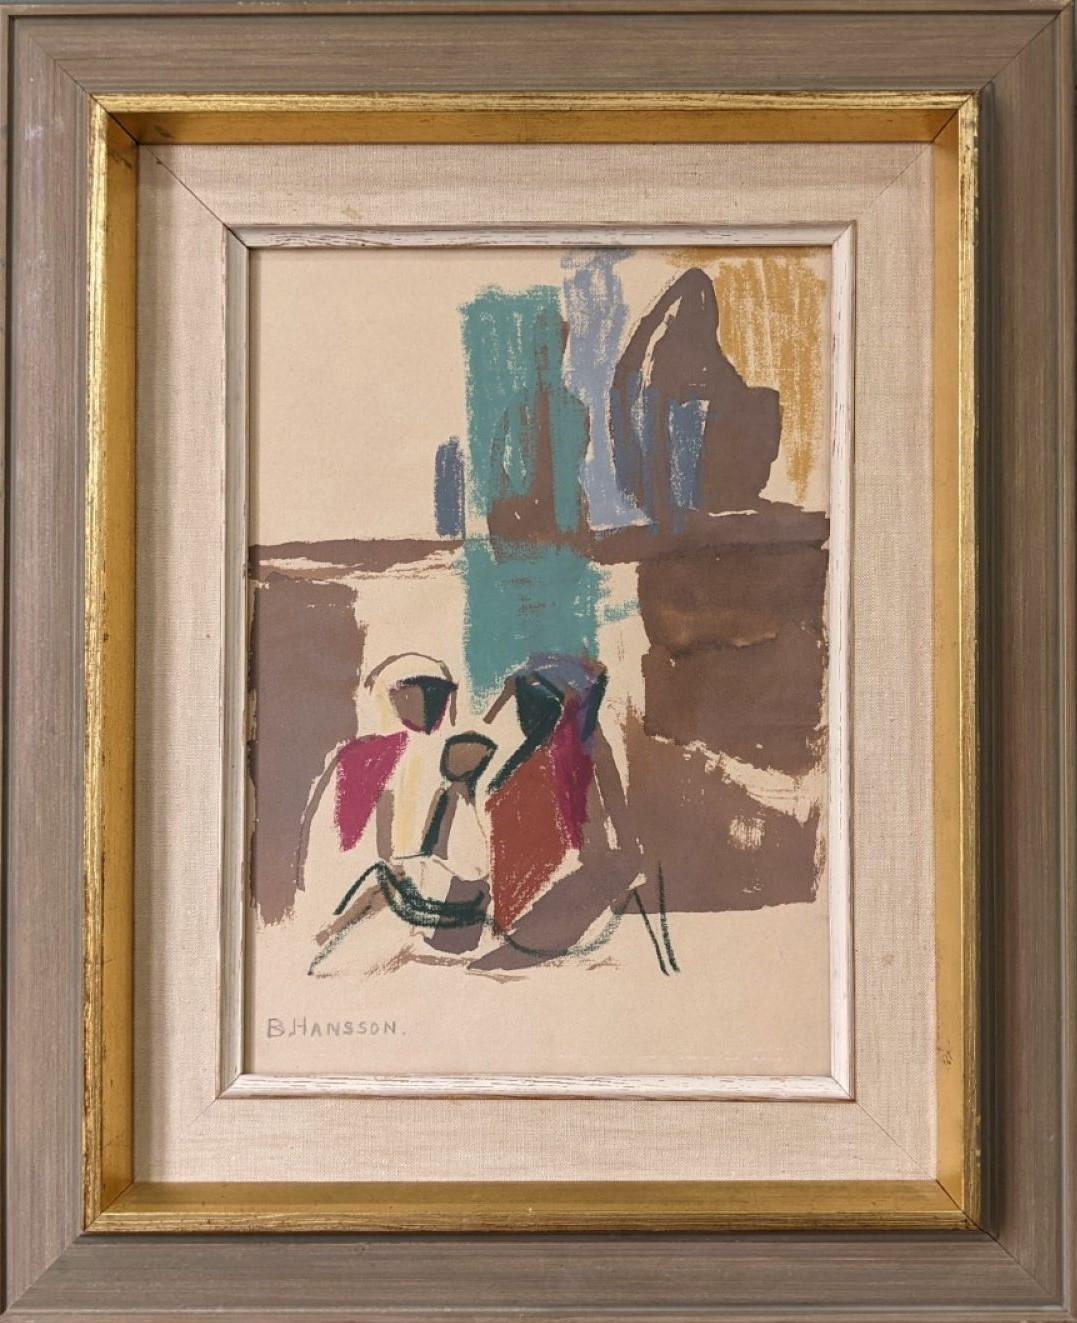 SEATED FIGURES
Size: 47 x 38 cm (including frame)
Watercolour and pastel on paper

An outstanding mid-century figurative composition, executed in pastel and watercolour on paper.

Painted in an abstract manner, all realistic details have been